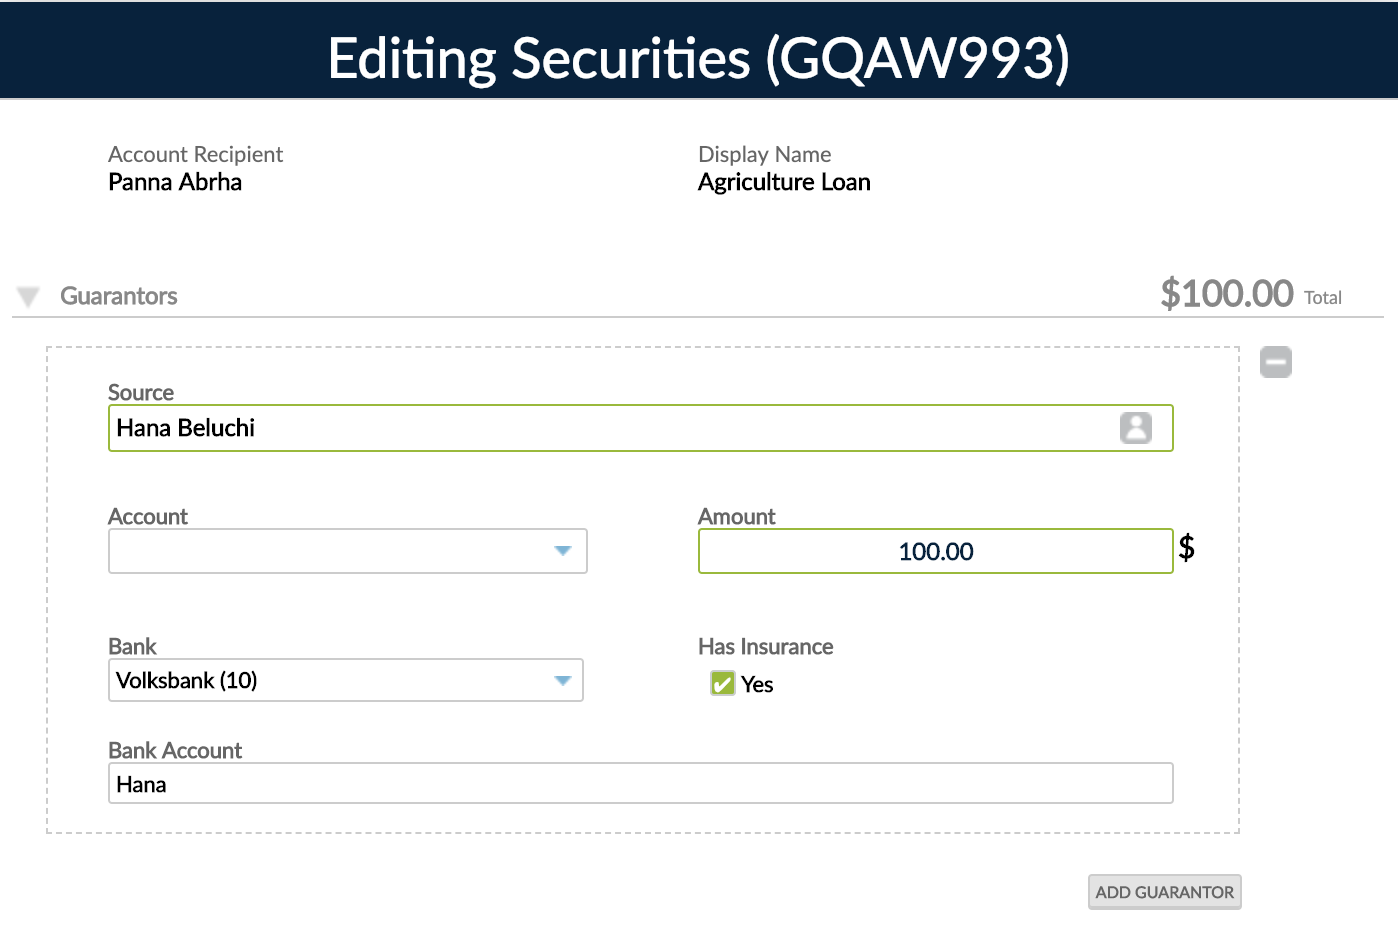 Editing Securities adding Guarantor with mandatory fields Source and Amount.